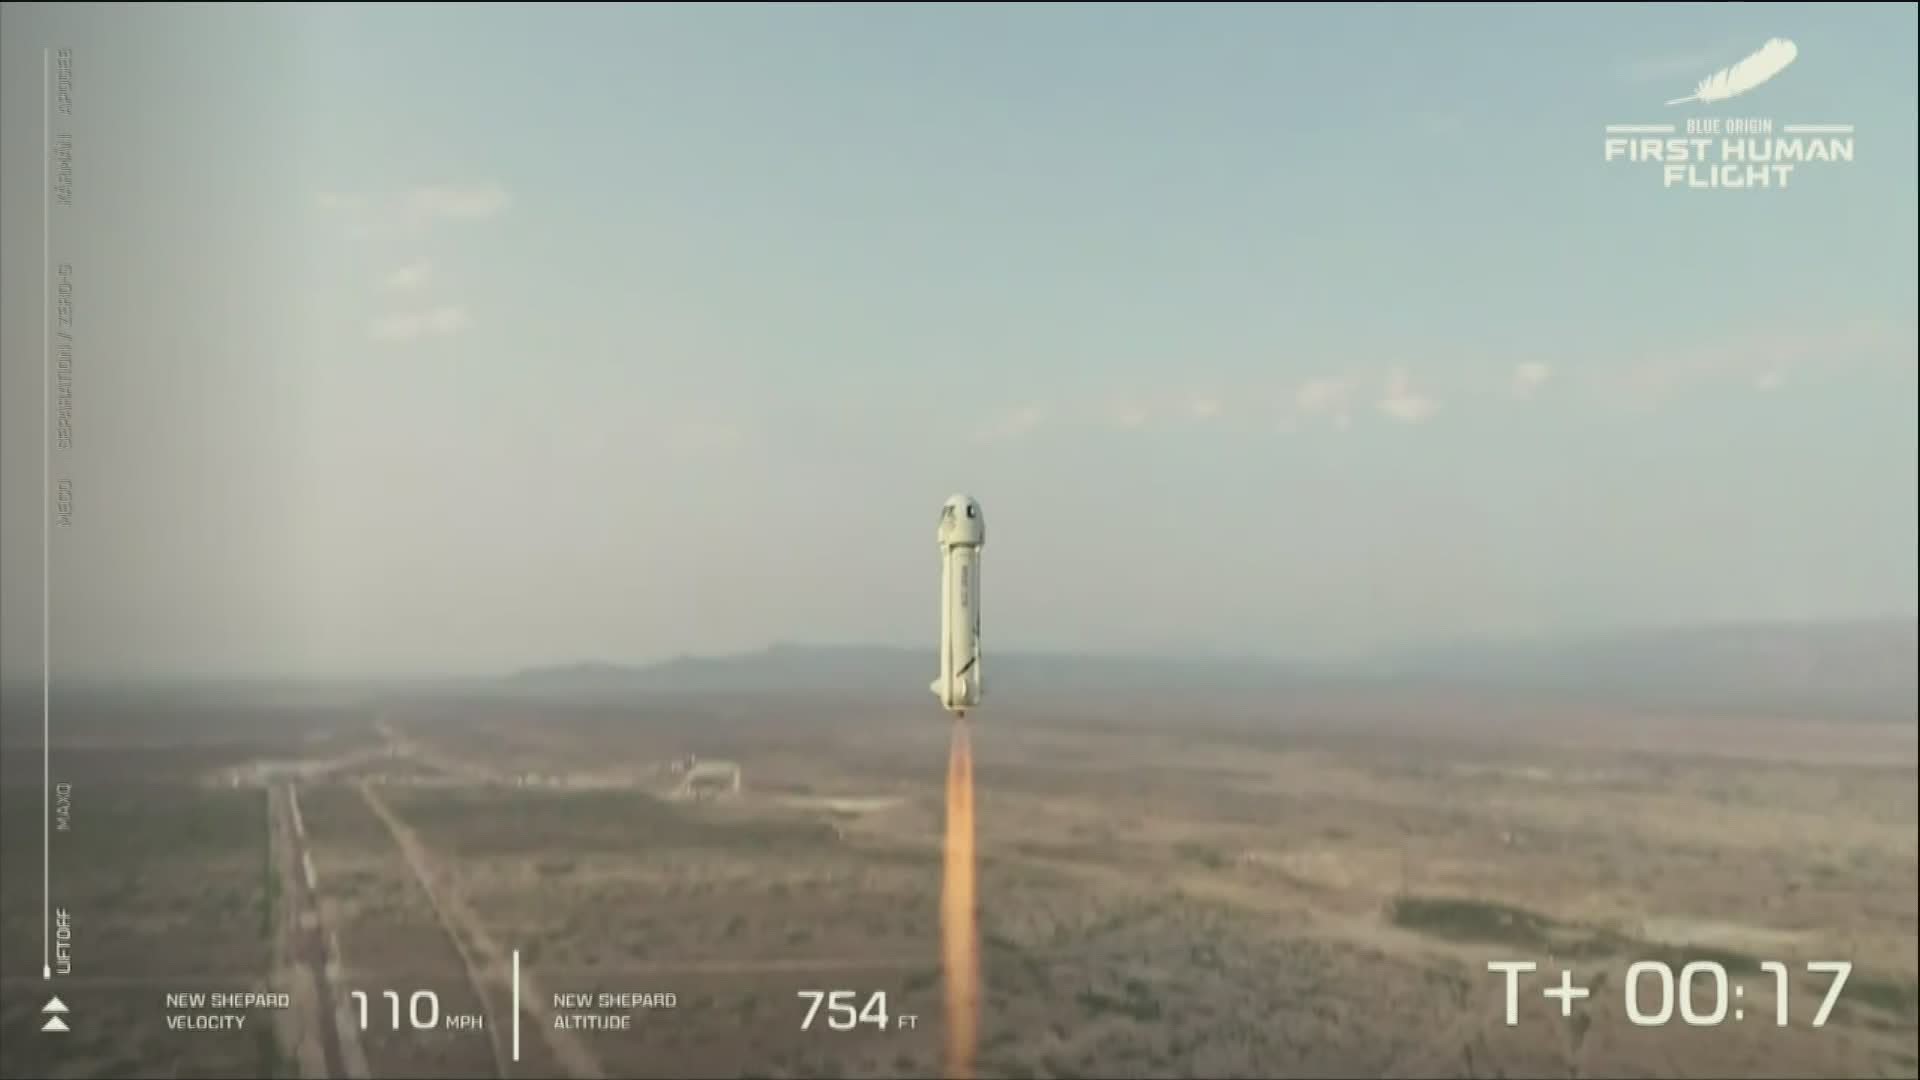 Blue Origin's first space flight launched into space from West Texas on Tuesday morning, with Jeff Bezos and crew returning to Earth's surface in under 11 minutes.